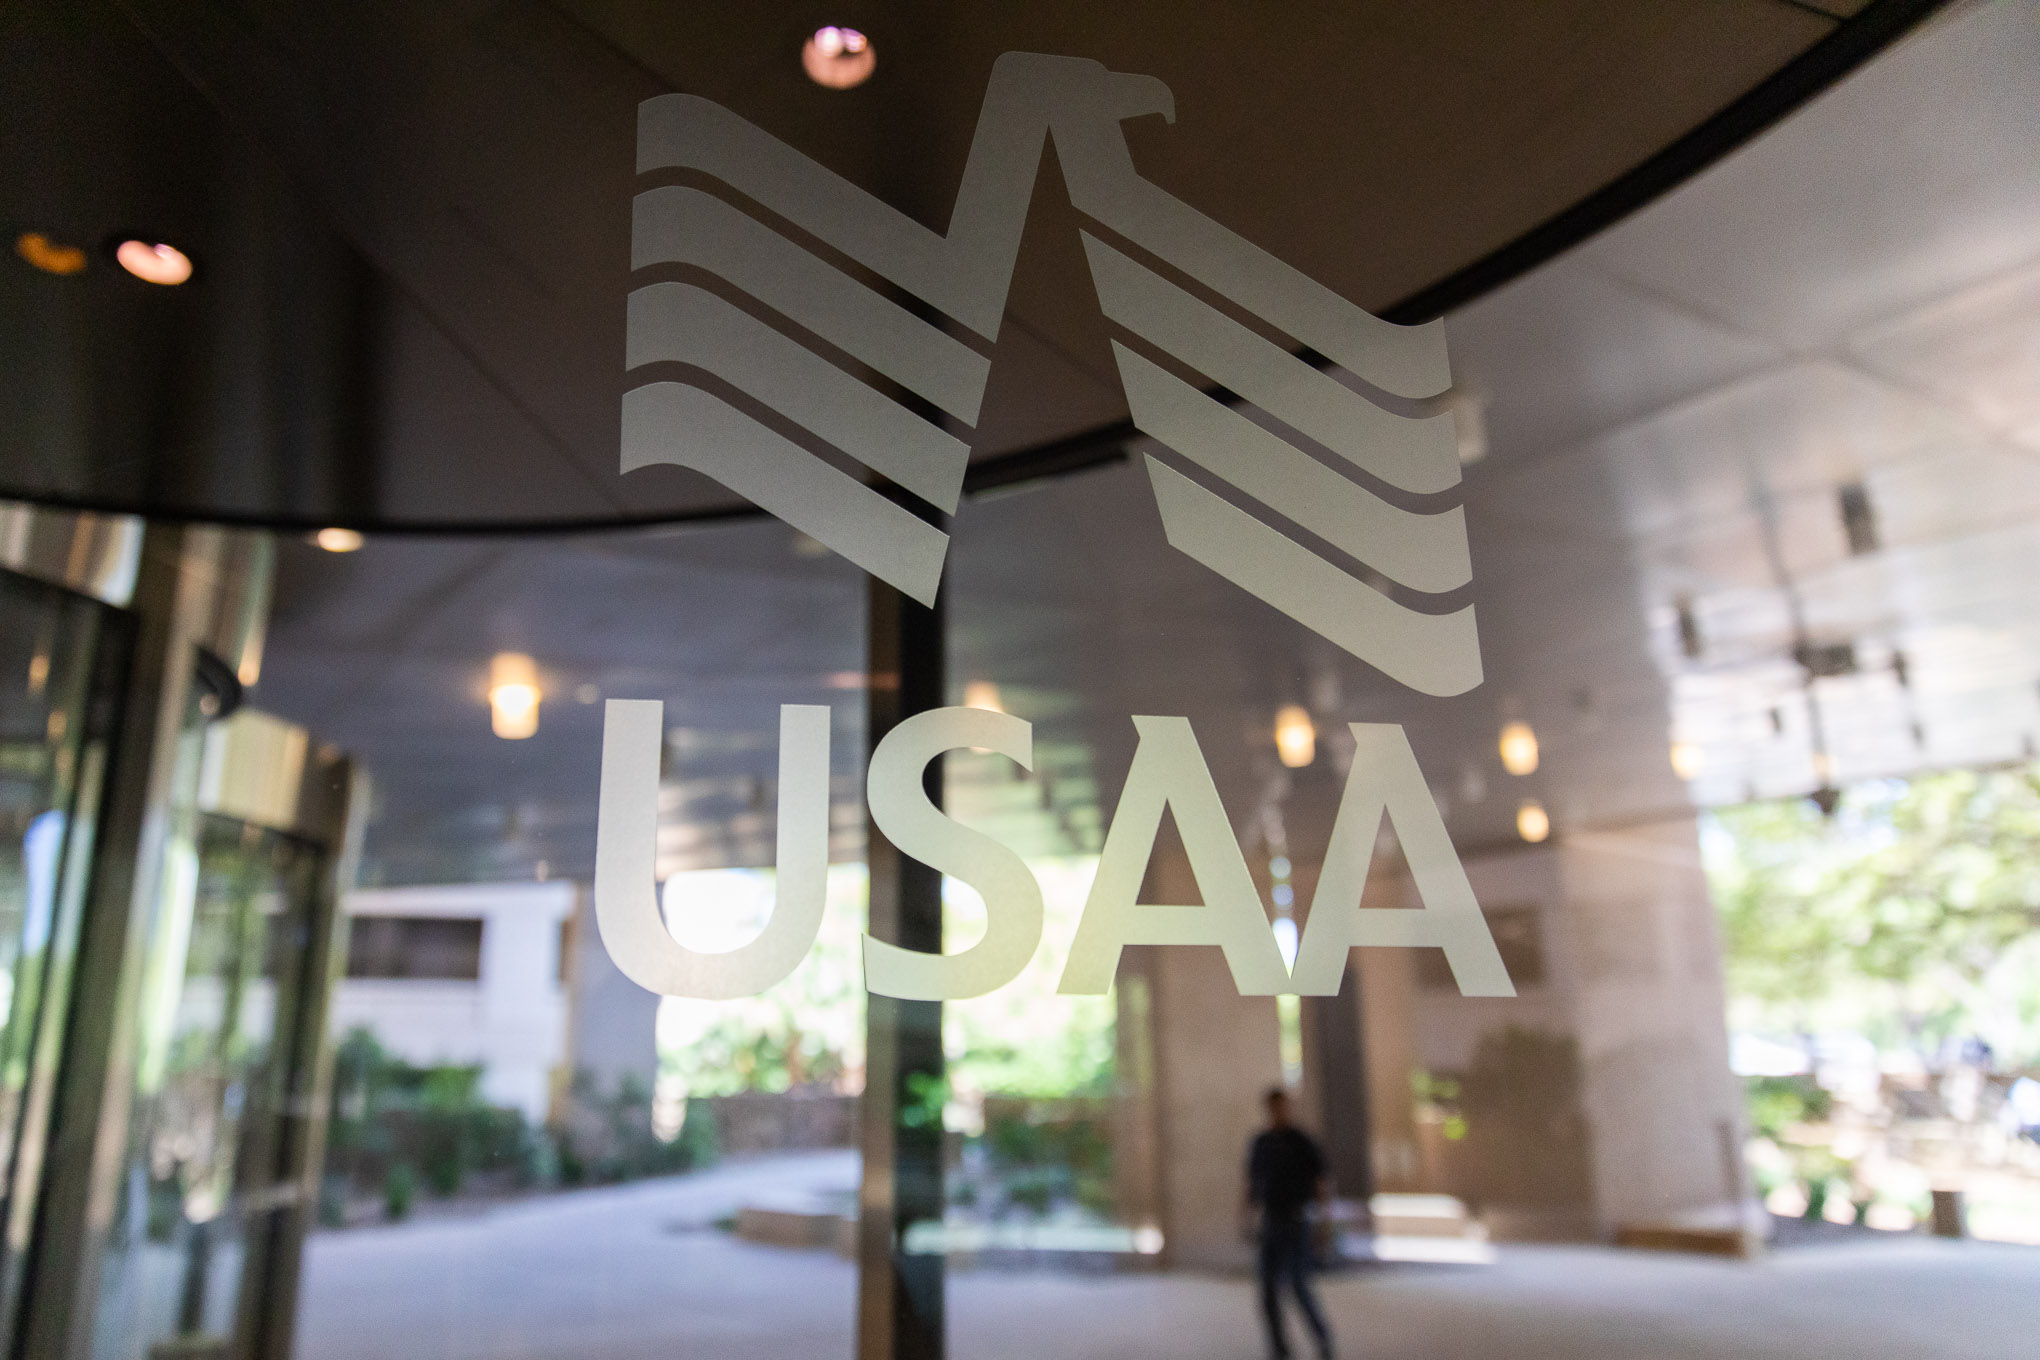 Usaa-Backed Coalition Launches $41 Million Fund to Prevent Veteran Suicide, Promote Mental Health  